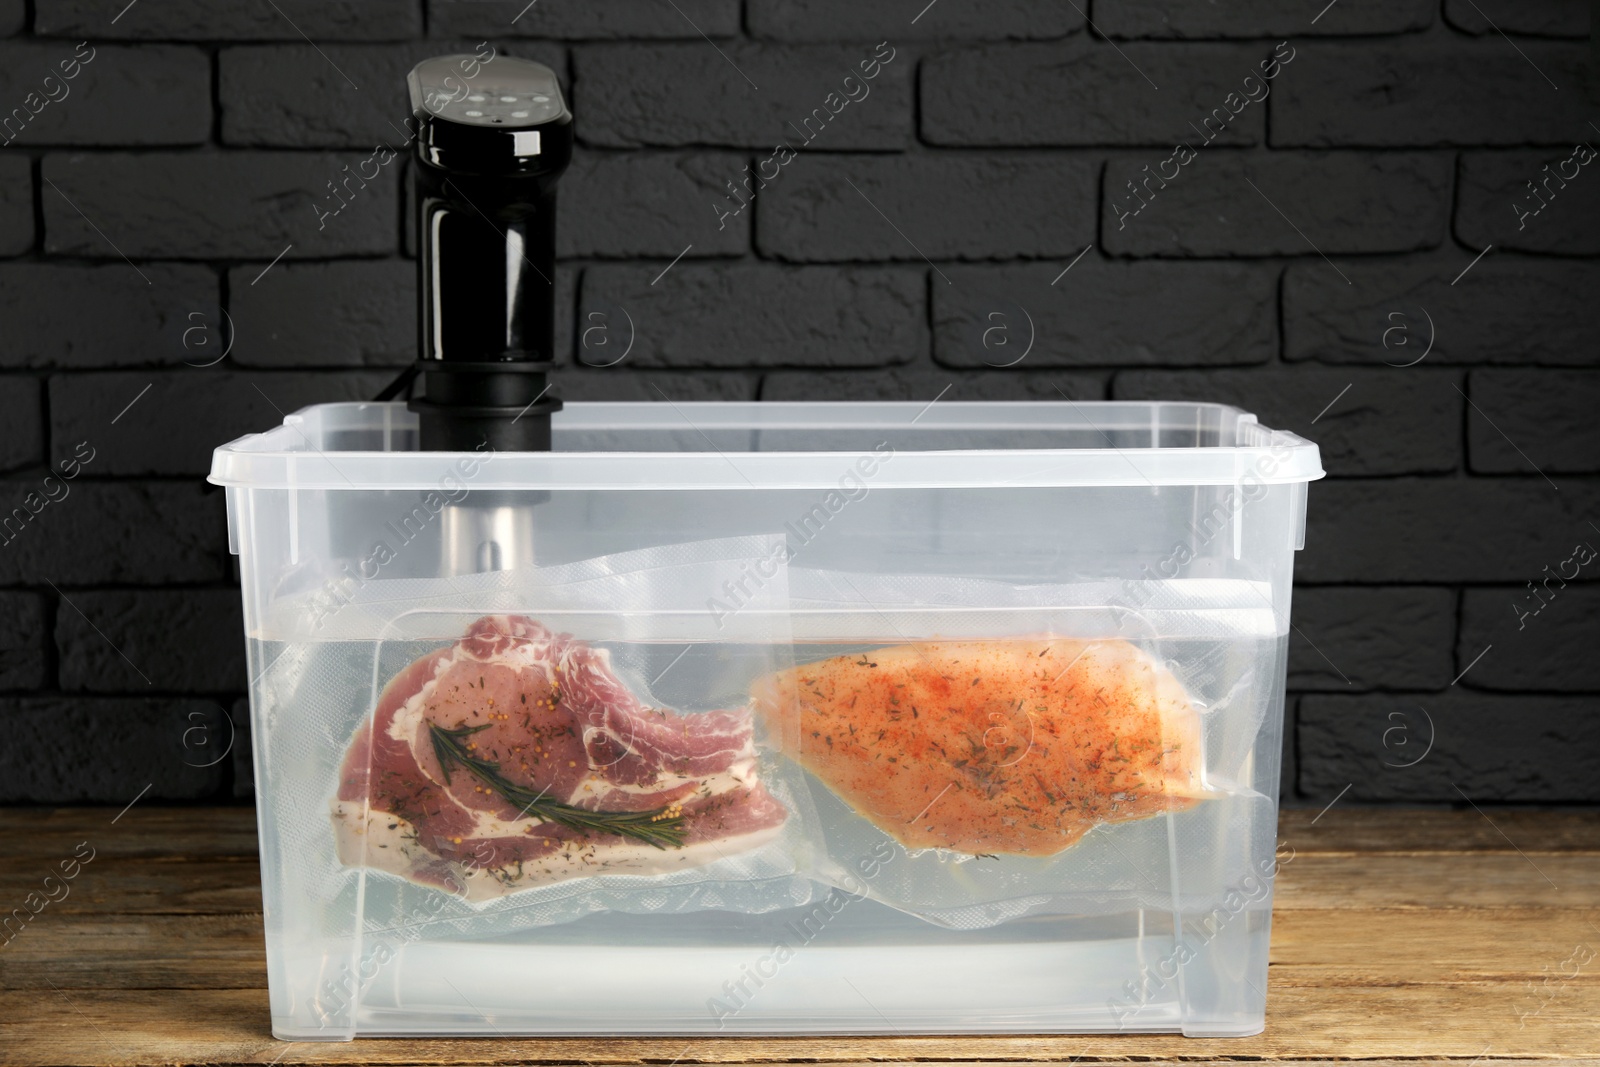 Photo of Thermal immersion circulator and vacuum packed meat in box on wooden table. Sous vide cooking